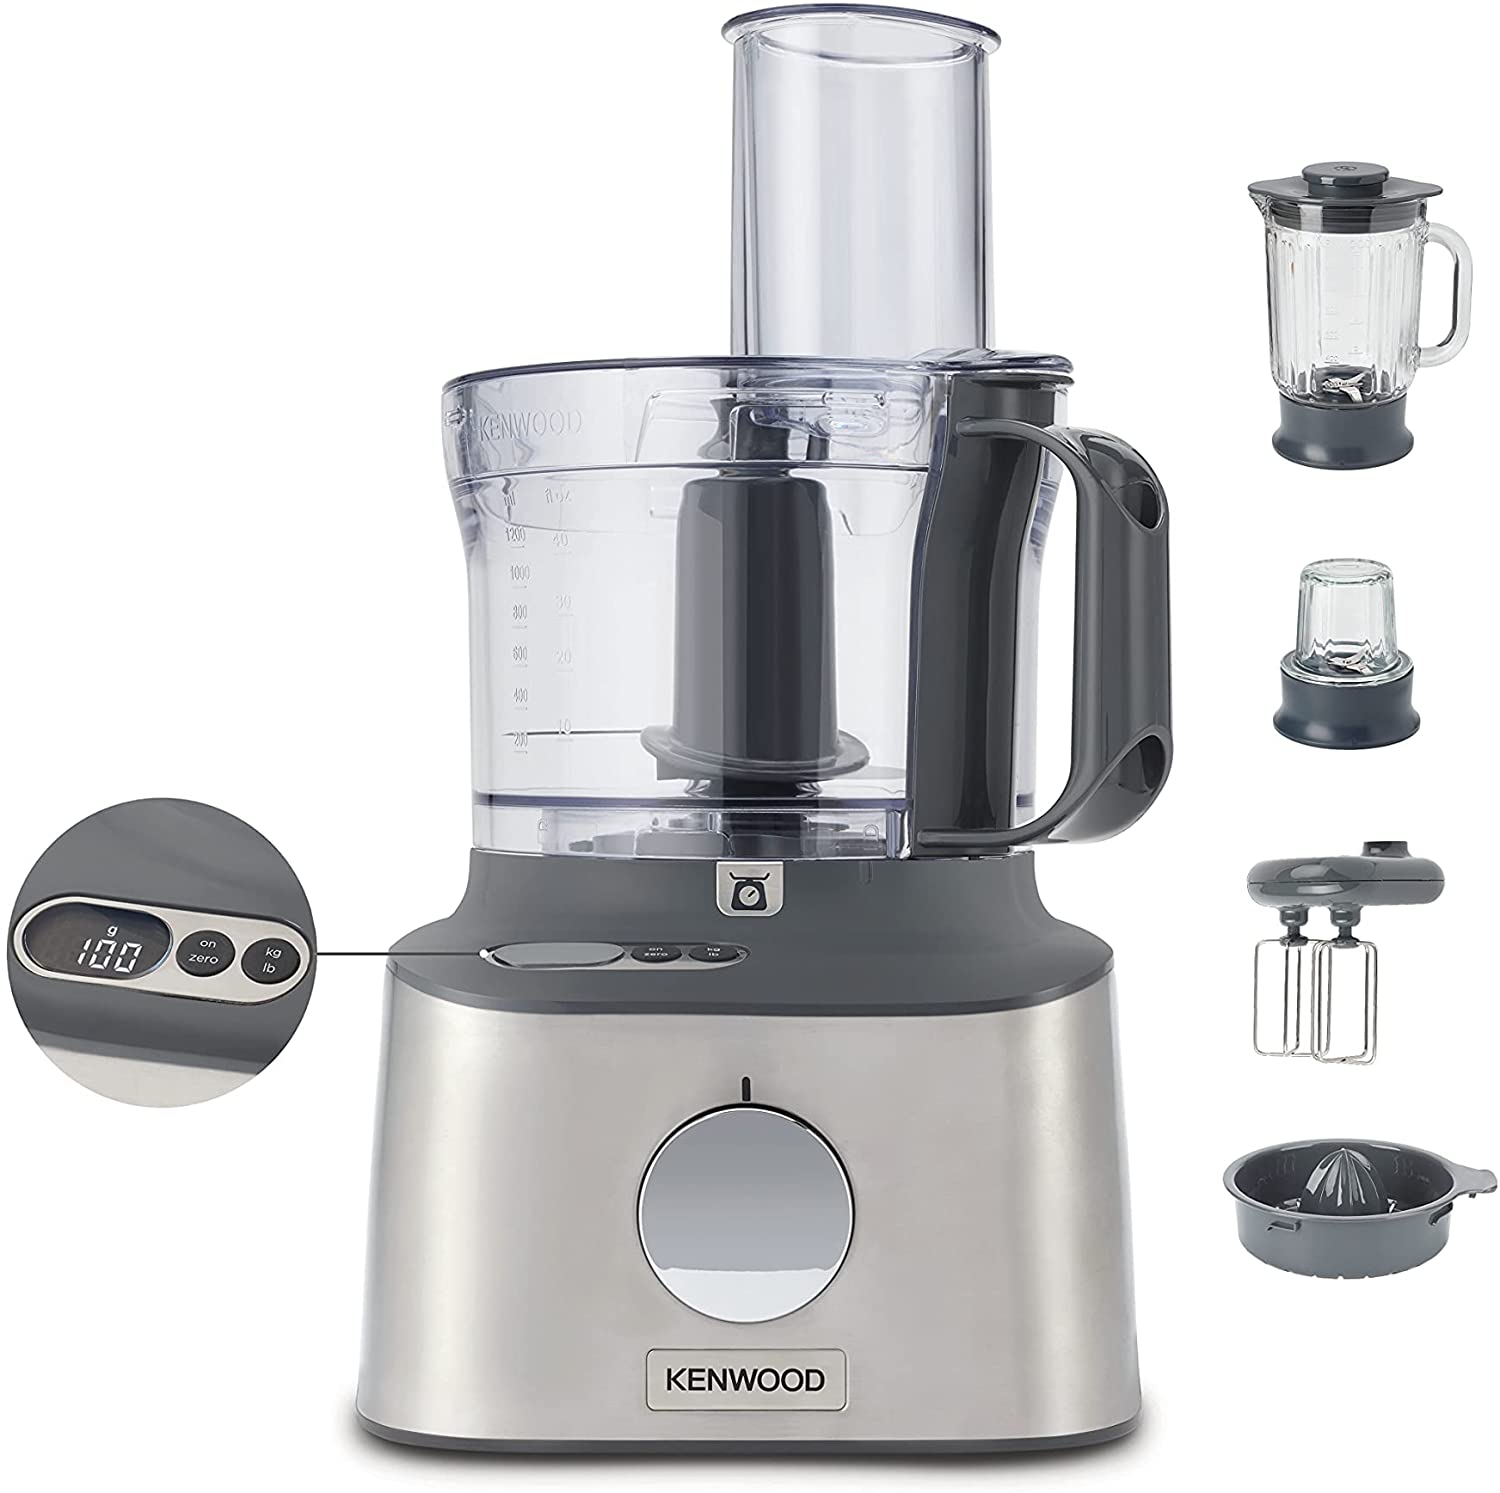 Kenwood FDM301SS Multipro Compact Food Processor, Powerful Kitchen Gadget with 2.1L Container, Acrylic Mixer, Double Whisk, Metal Housing